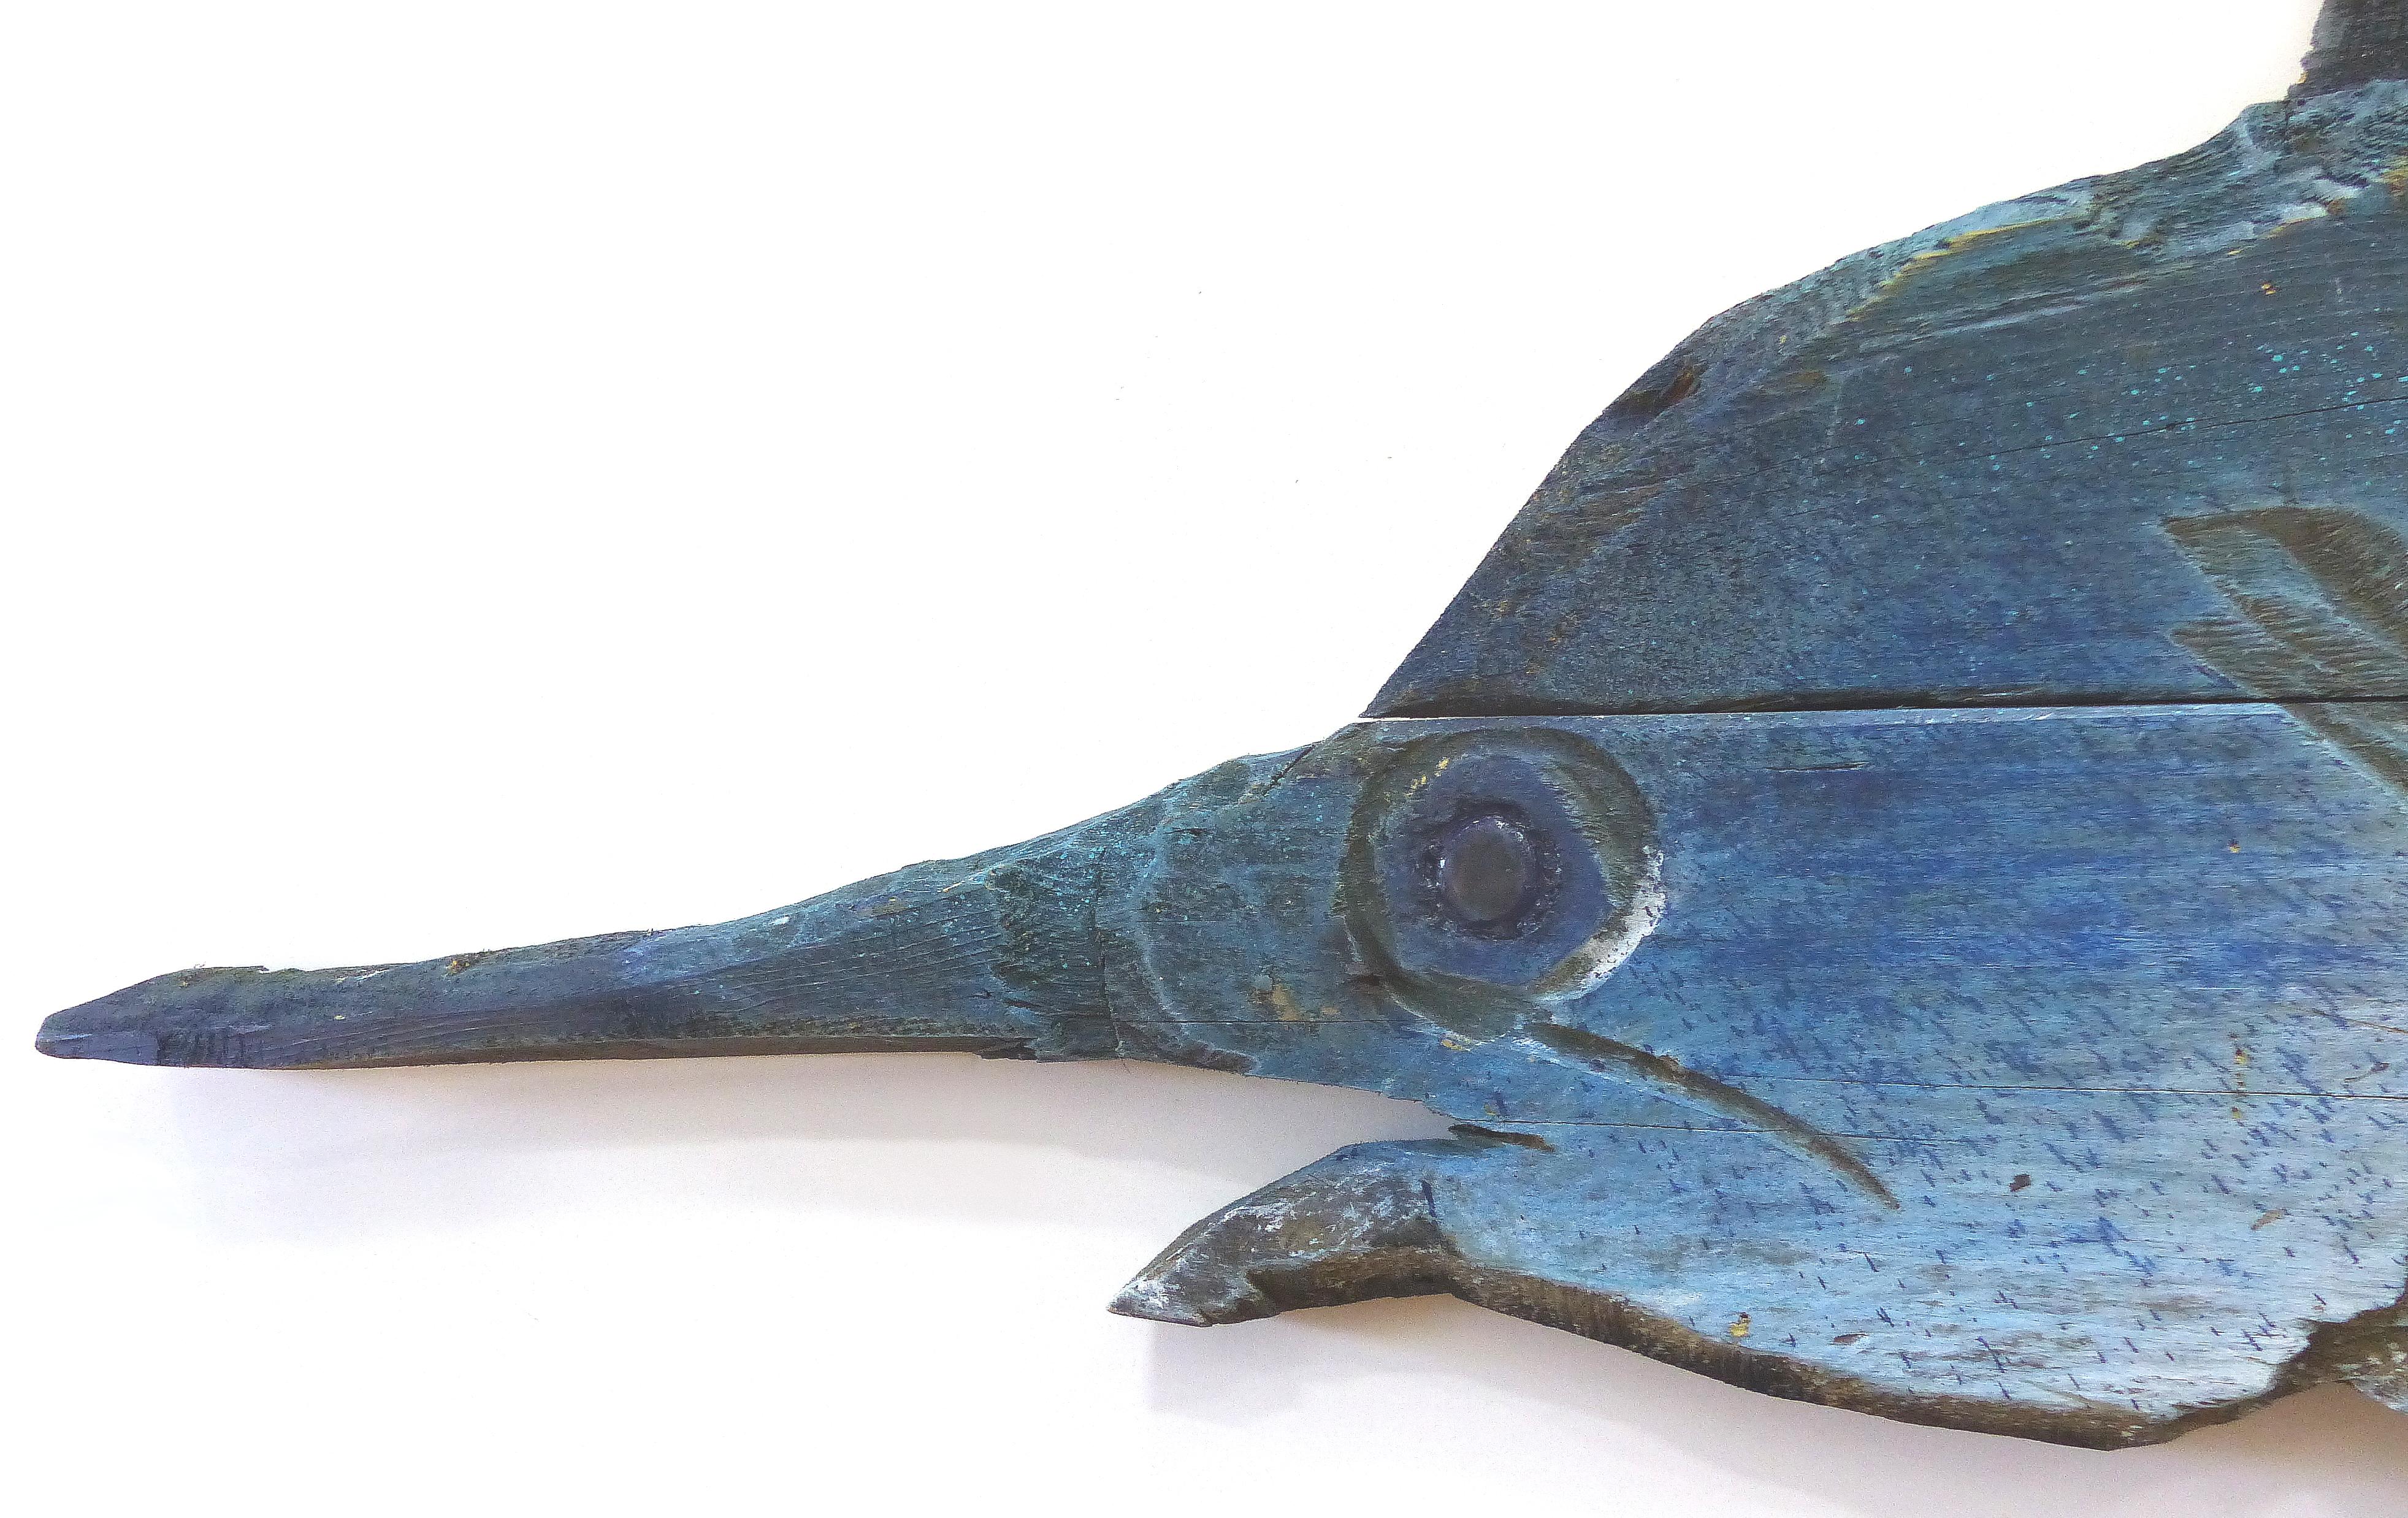 Offered for sale is a large life-size hand carved wall sculpture of a blue marlin by artist Davis Murphy. Murphy has created a body of work using some of the most beautiful hardwoods found in America's forests. His most recent body of work captures